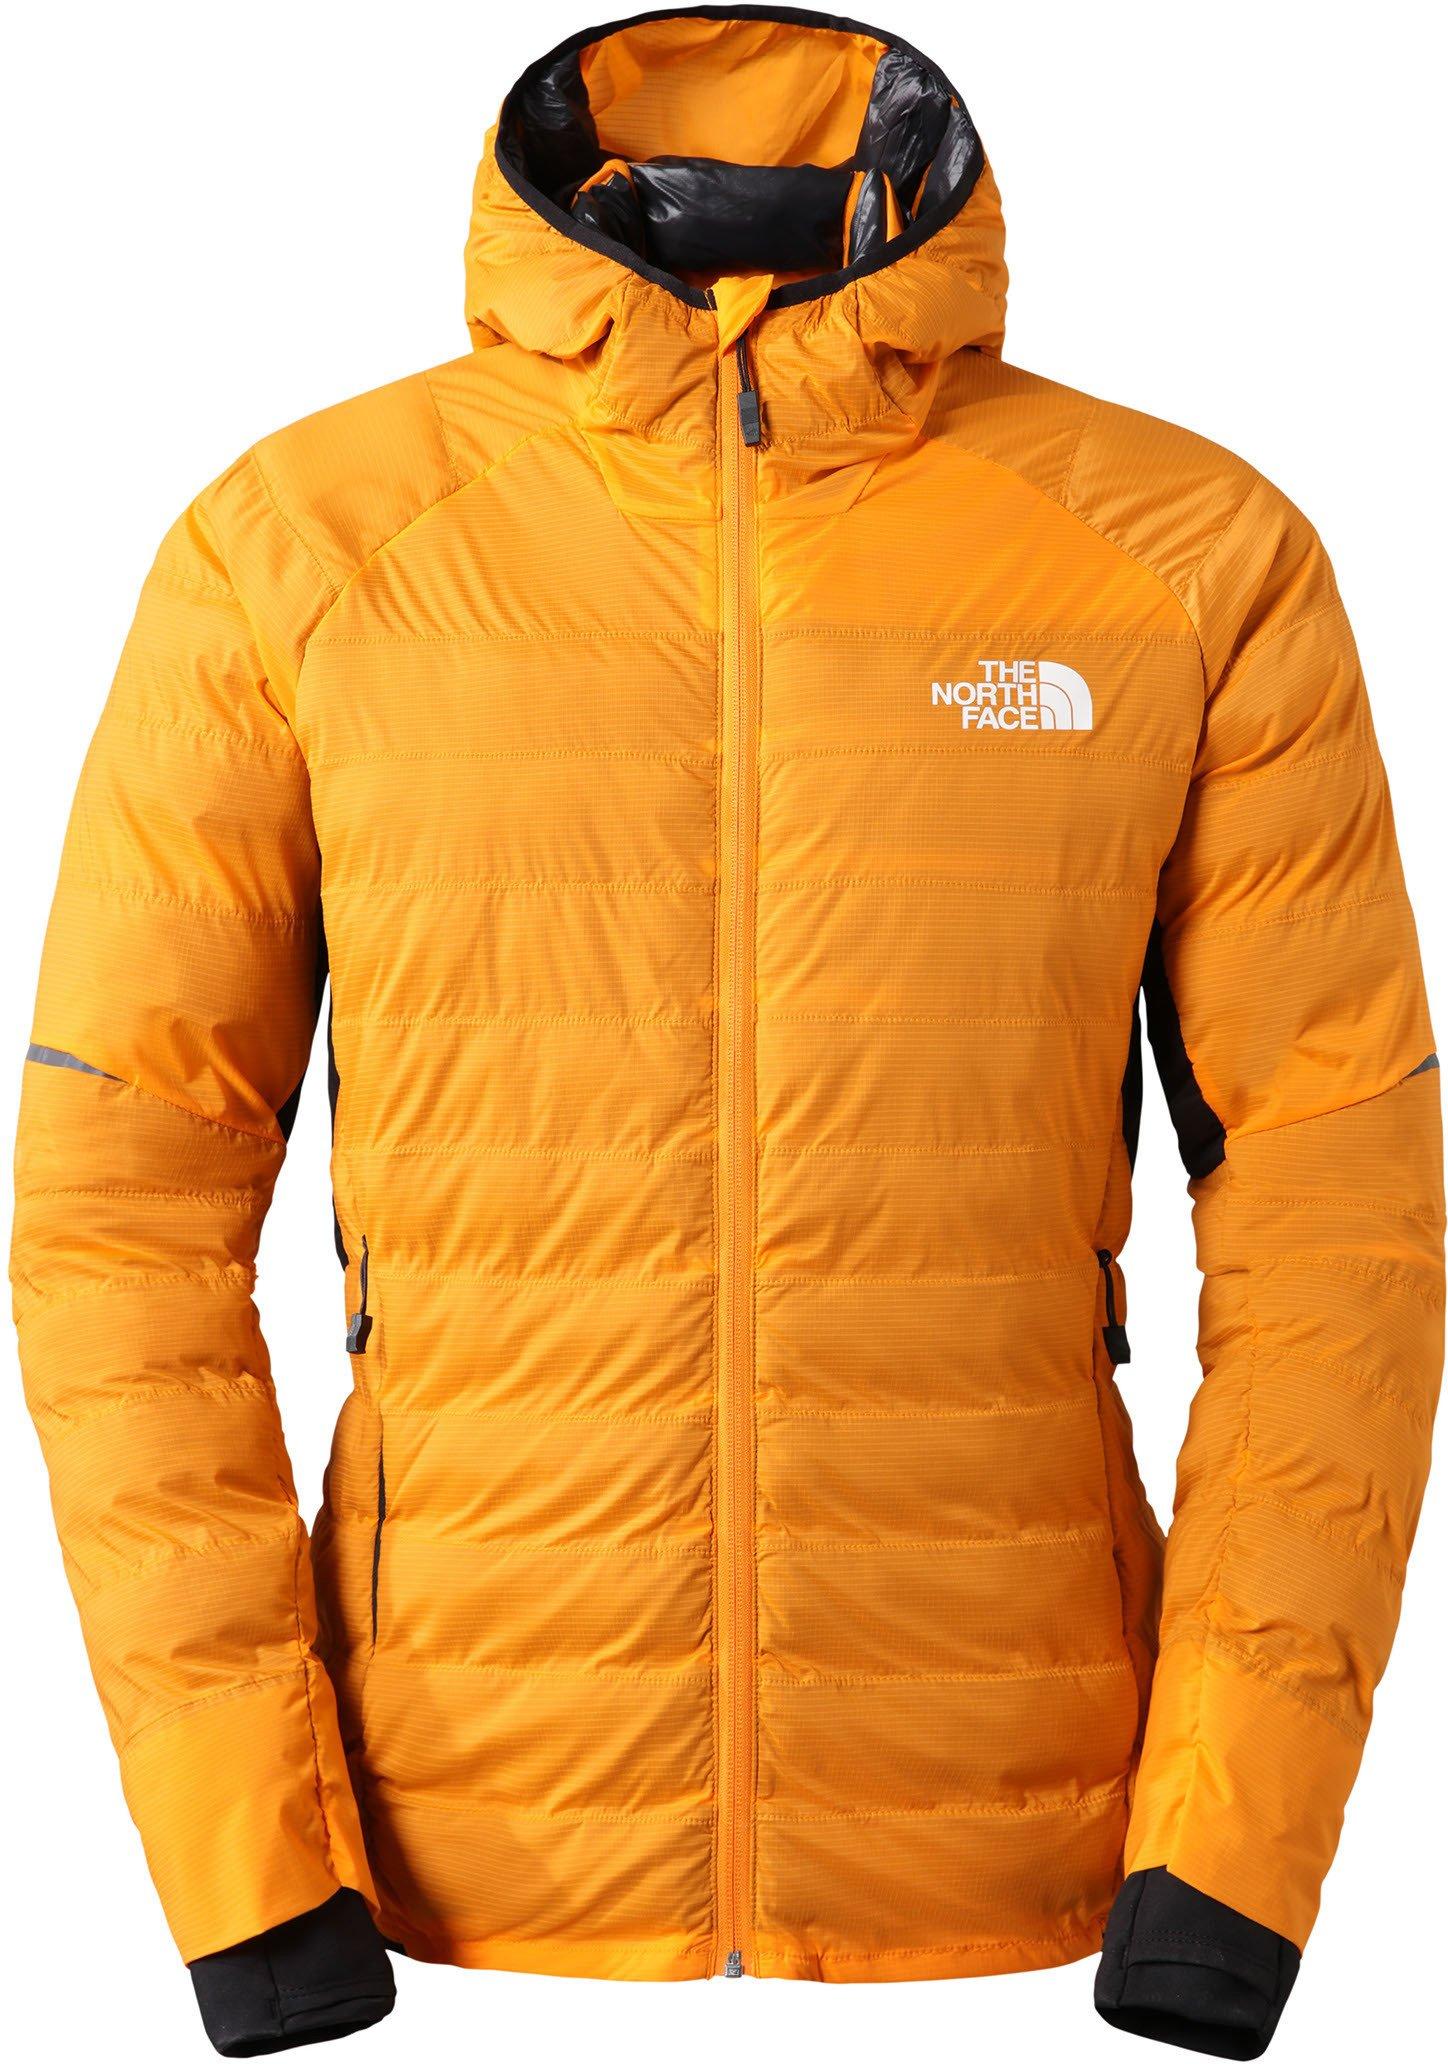 The North Face Men’s Dawn Turn 50/50 Synthetic L